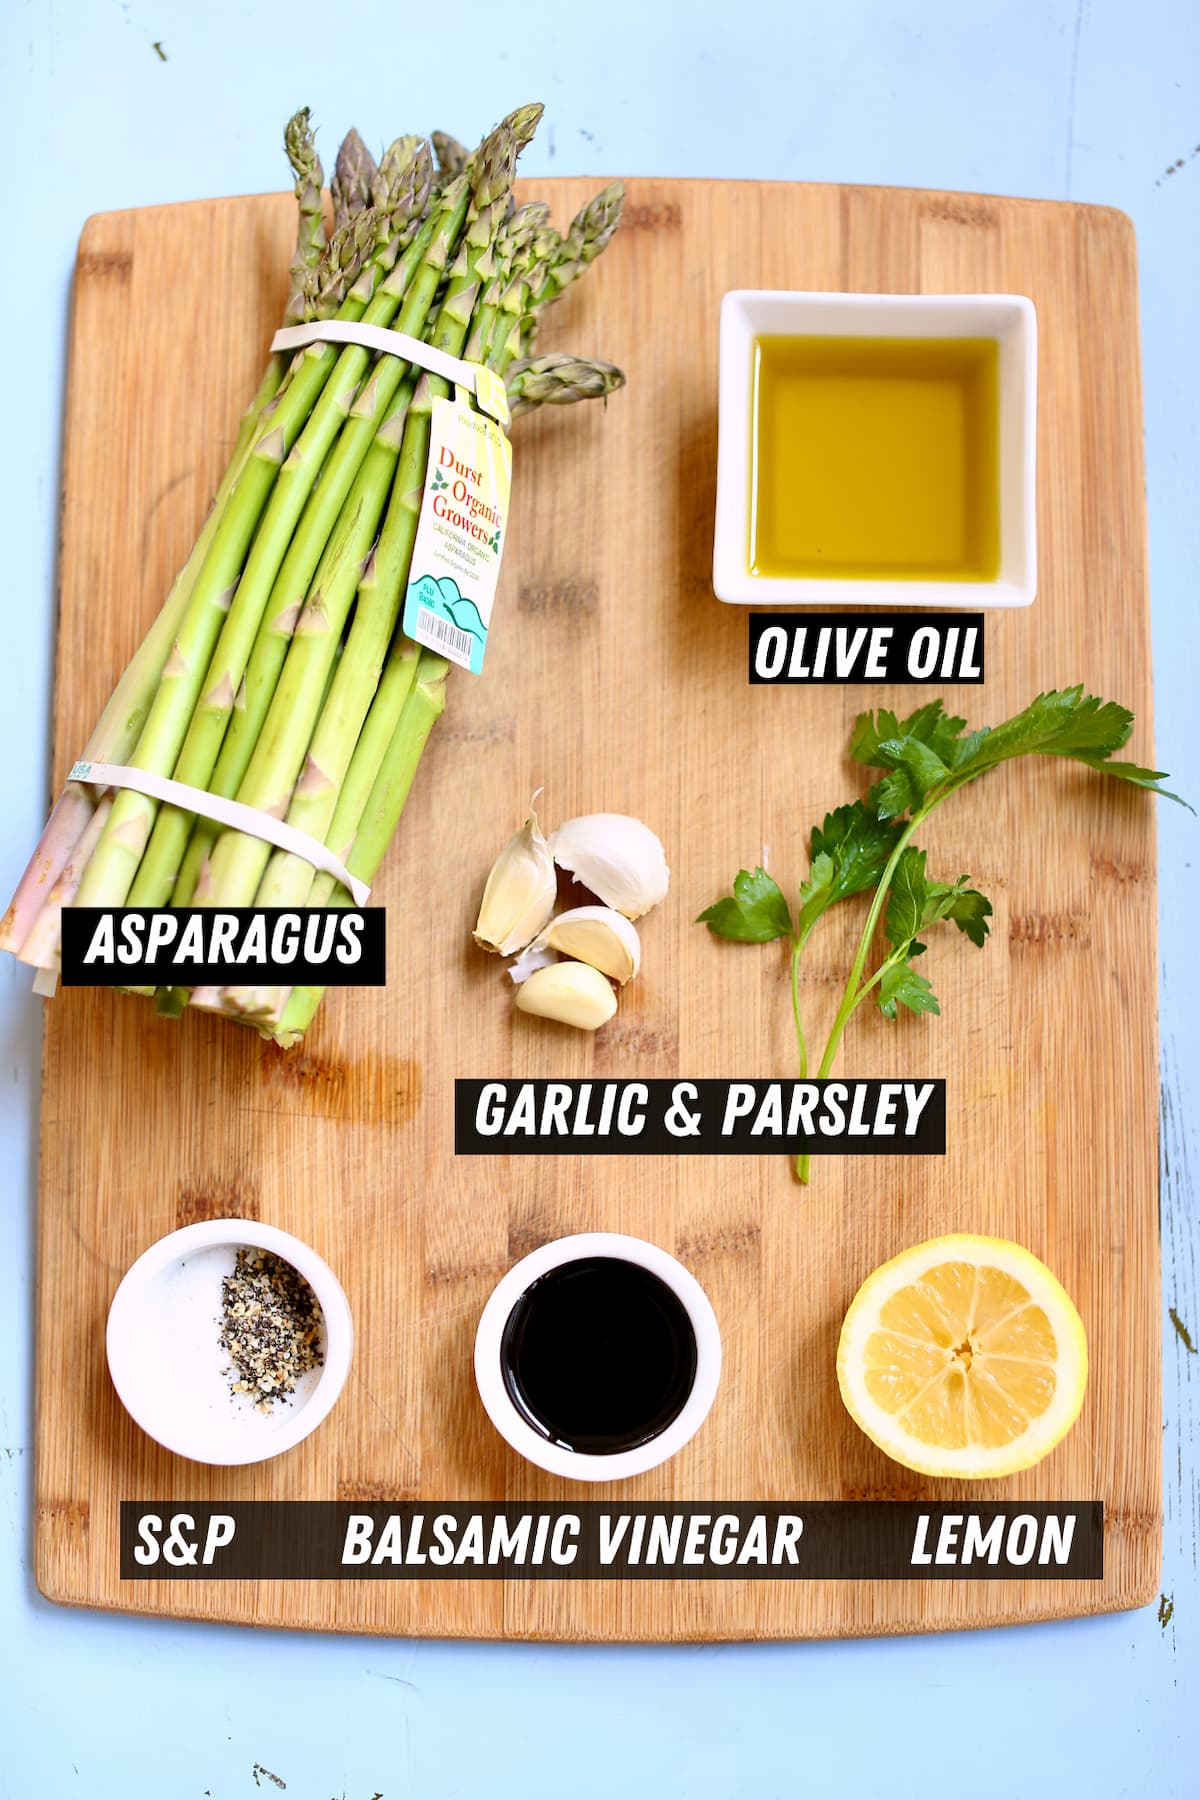 a cutting board with ingredeints like asparagus, parsley, olive oil and seasonings